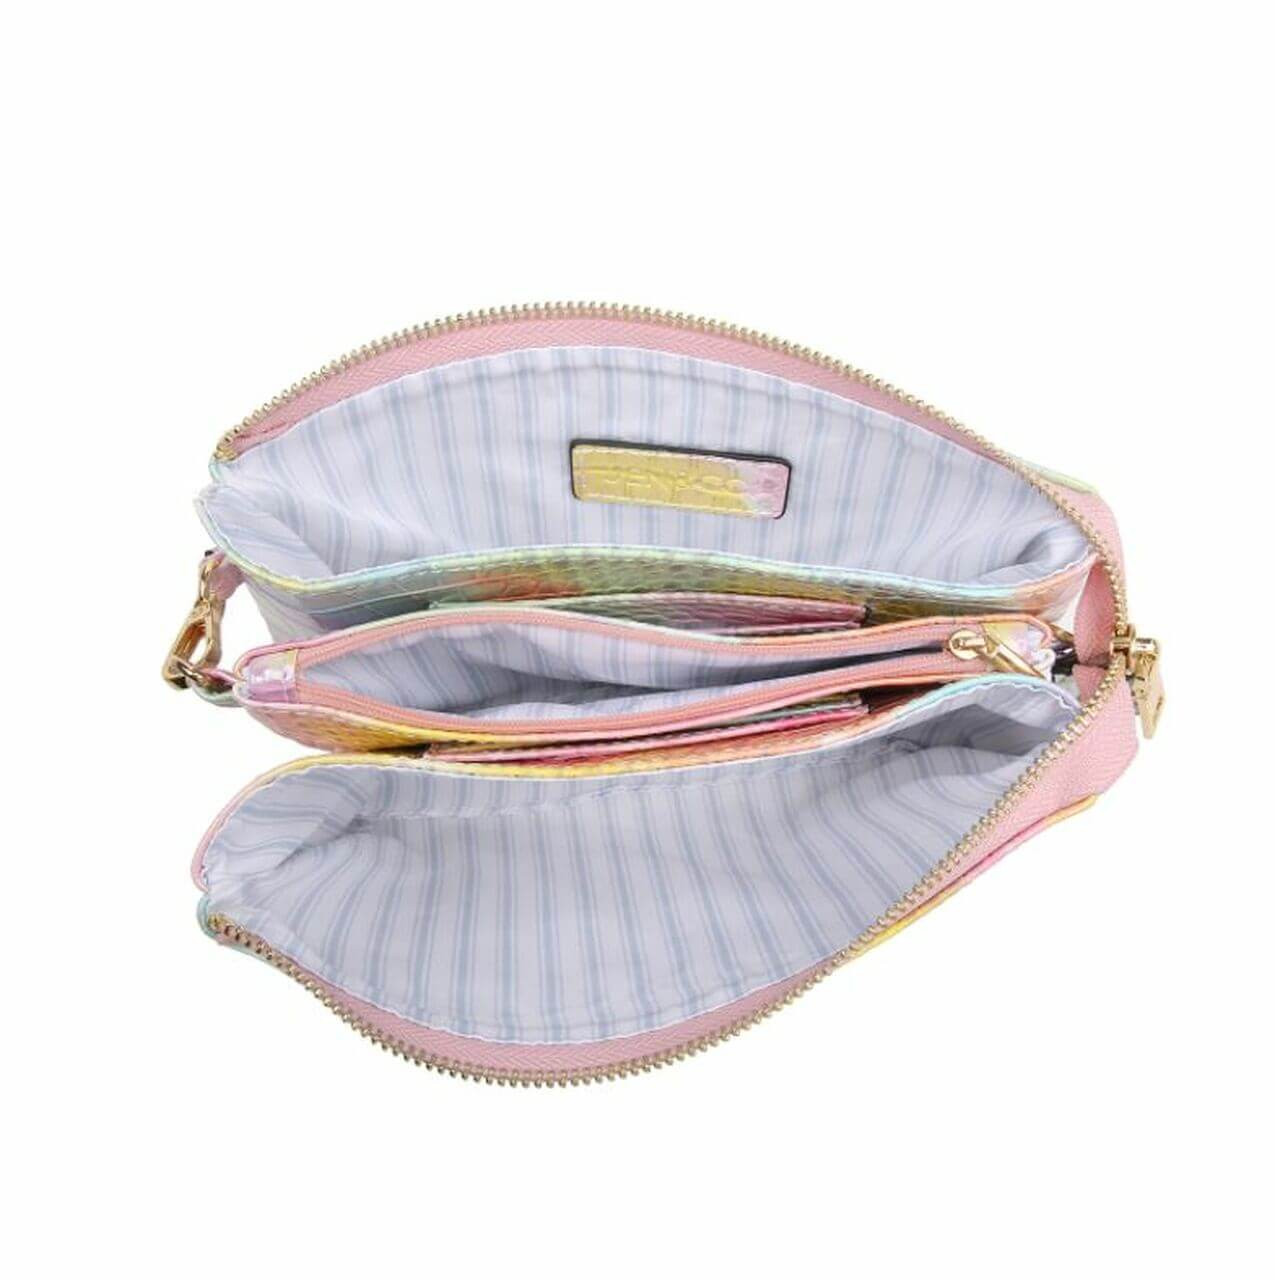 Riley plum Wristlet and adjustable crossbody strap included. Three separate interior compartments with six credit card slots. Top zipper closure.